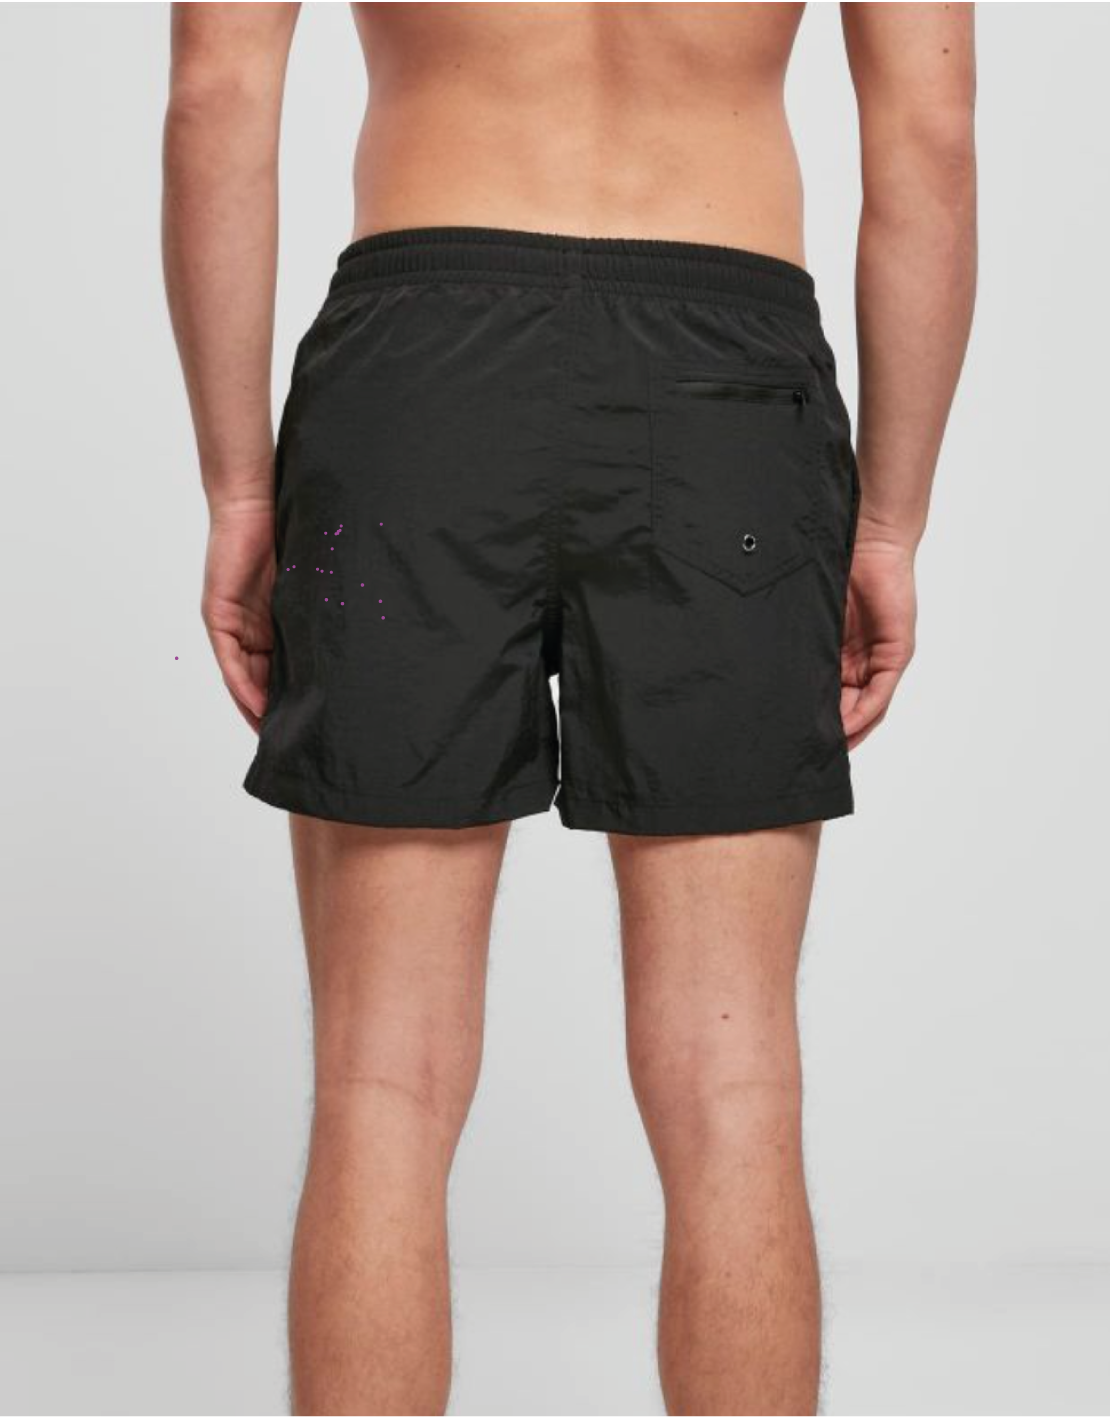 RALPHSON 5" swimshorts Embroidery RC